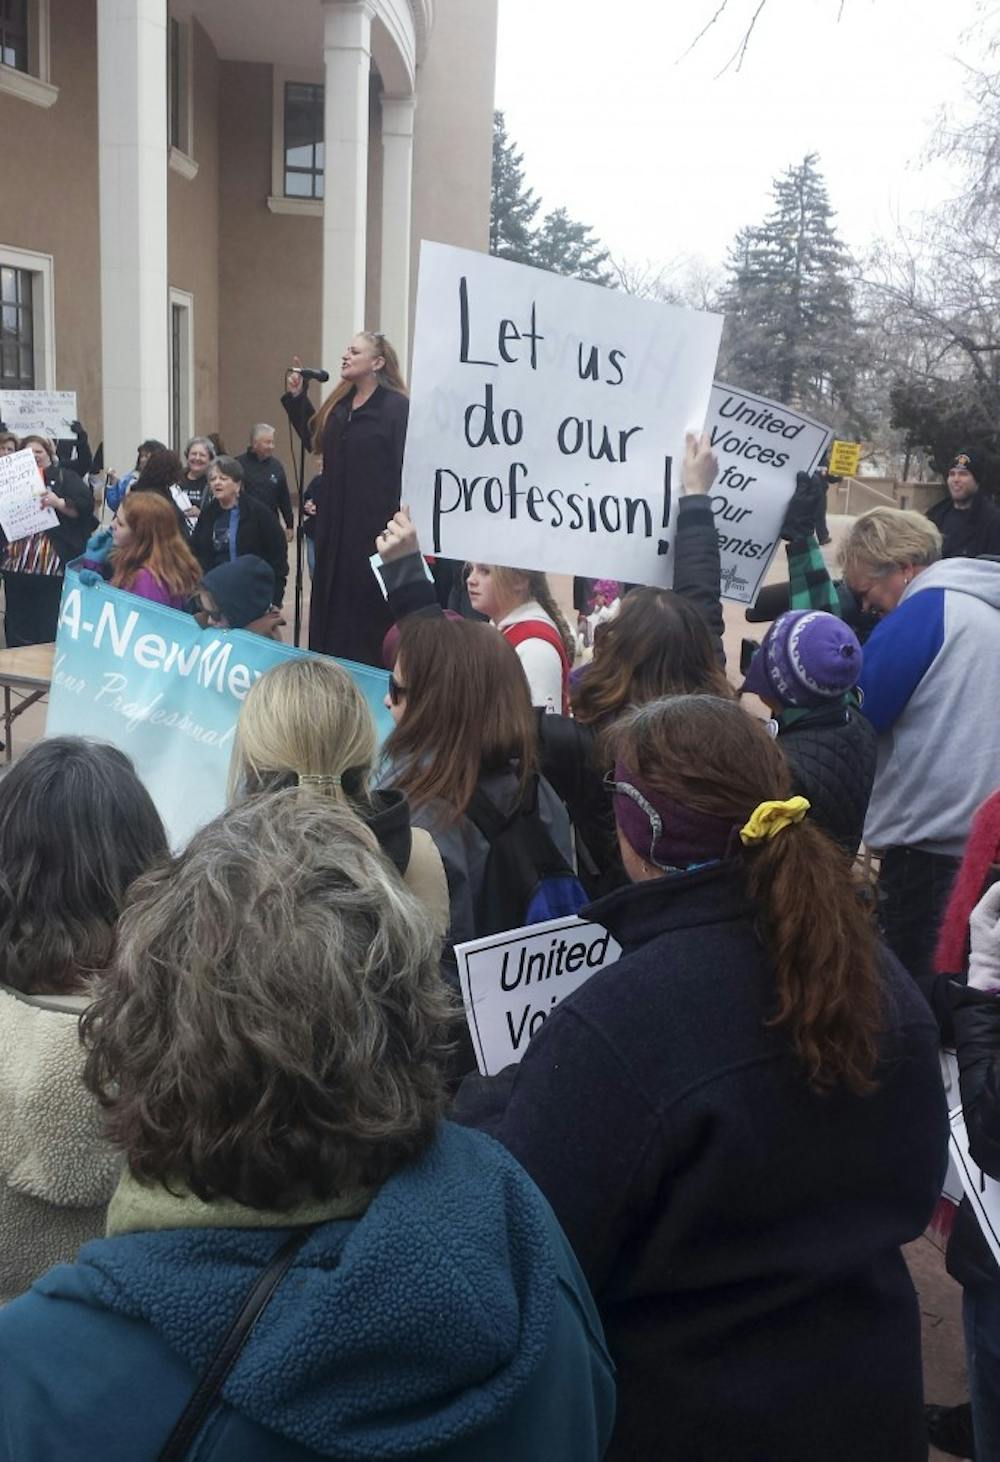 Teachers gather on Monday afternoon at the Roundhouse in Santa Fe to protest legislative proposals that could be detrimental to the education profession.